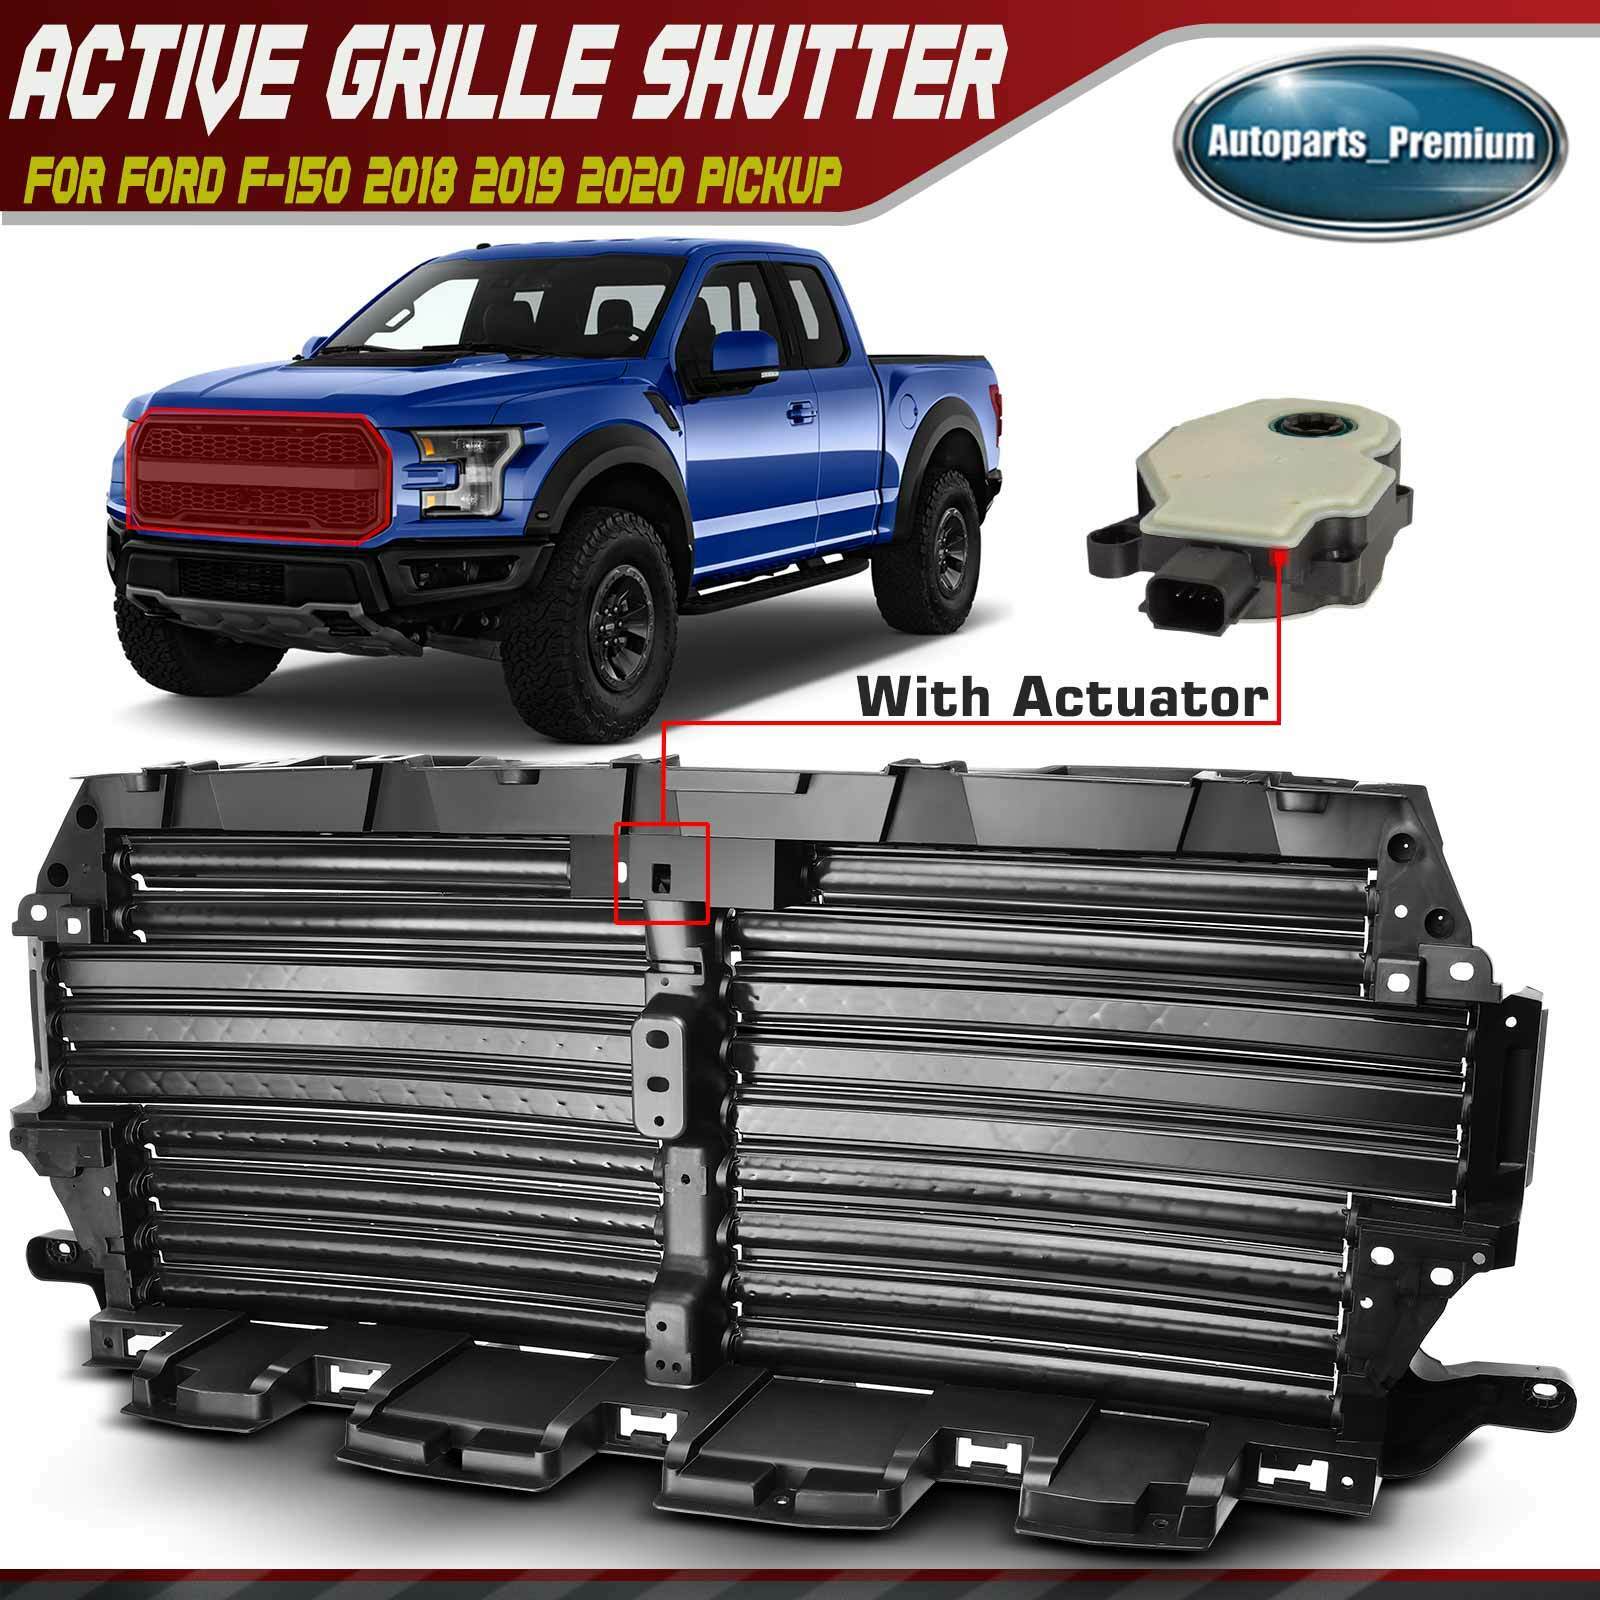 Upper Radiator Grille Air Shutter for Ford F-150 F150 2018-2020 w/Actuator Motor